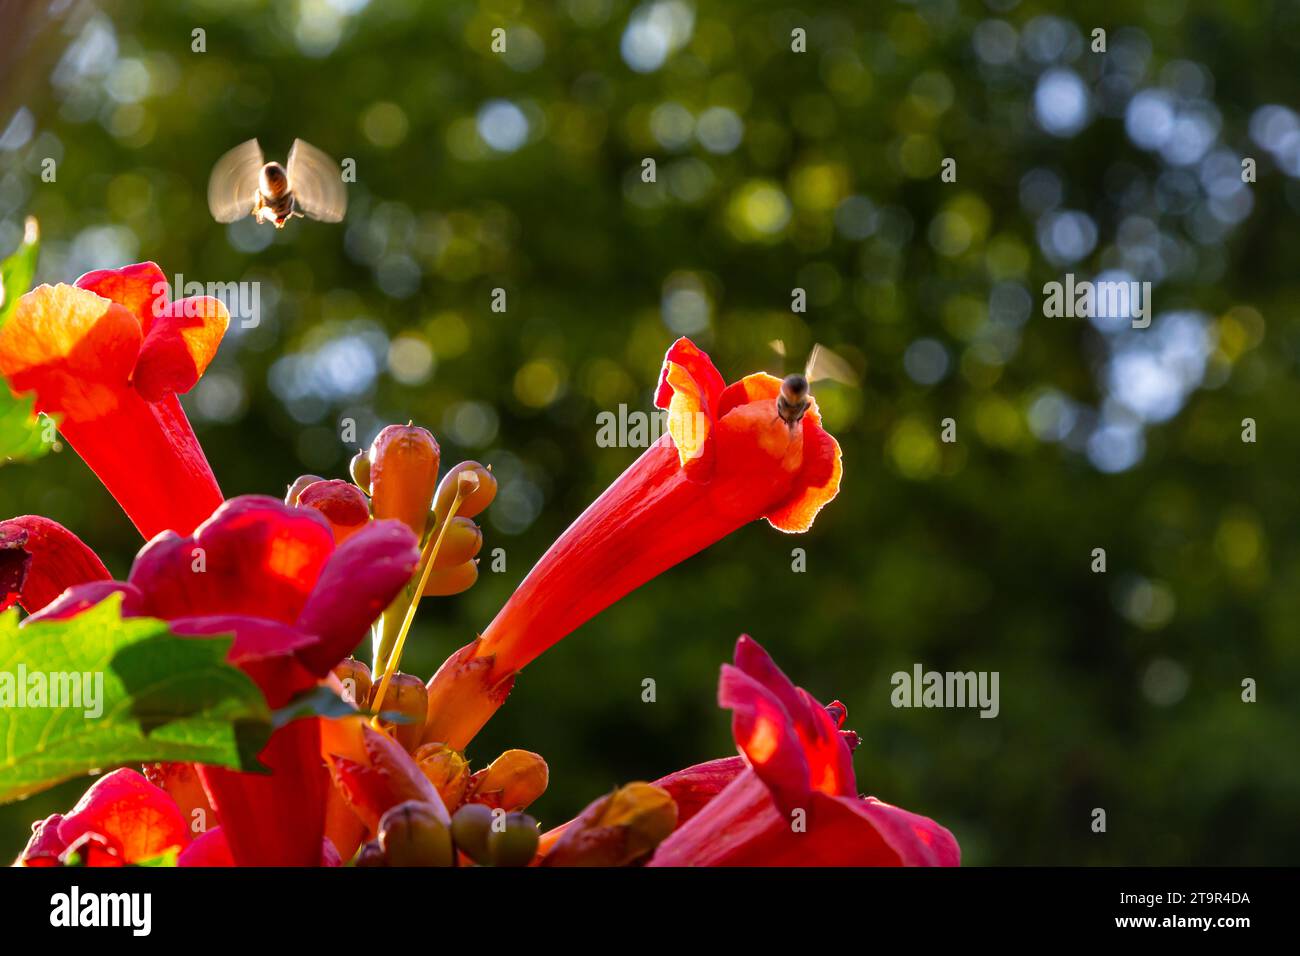 Beautiful red flowers of the trumpet vine or trumpet creeper Campsis radicans surrounded by green leaves. Stock Photo